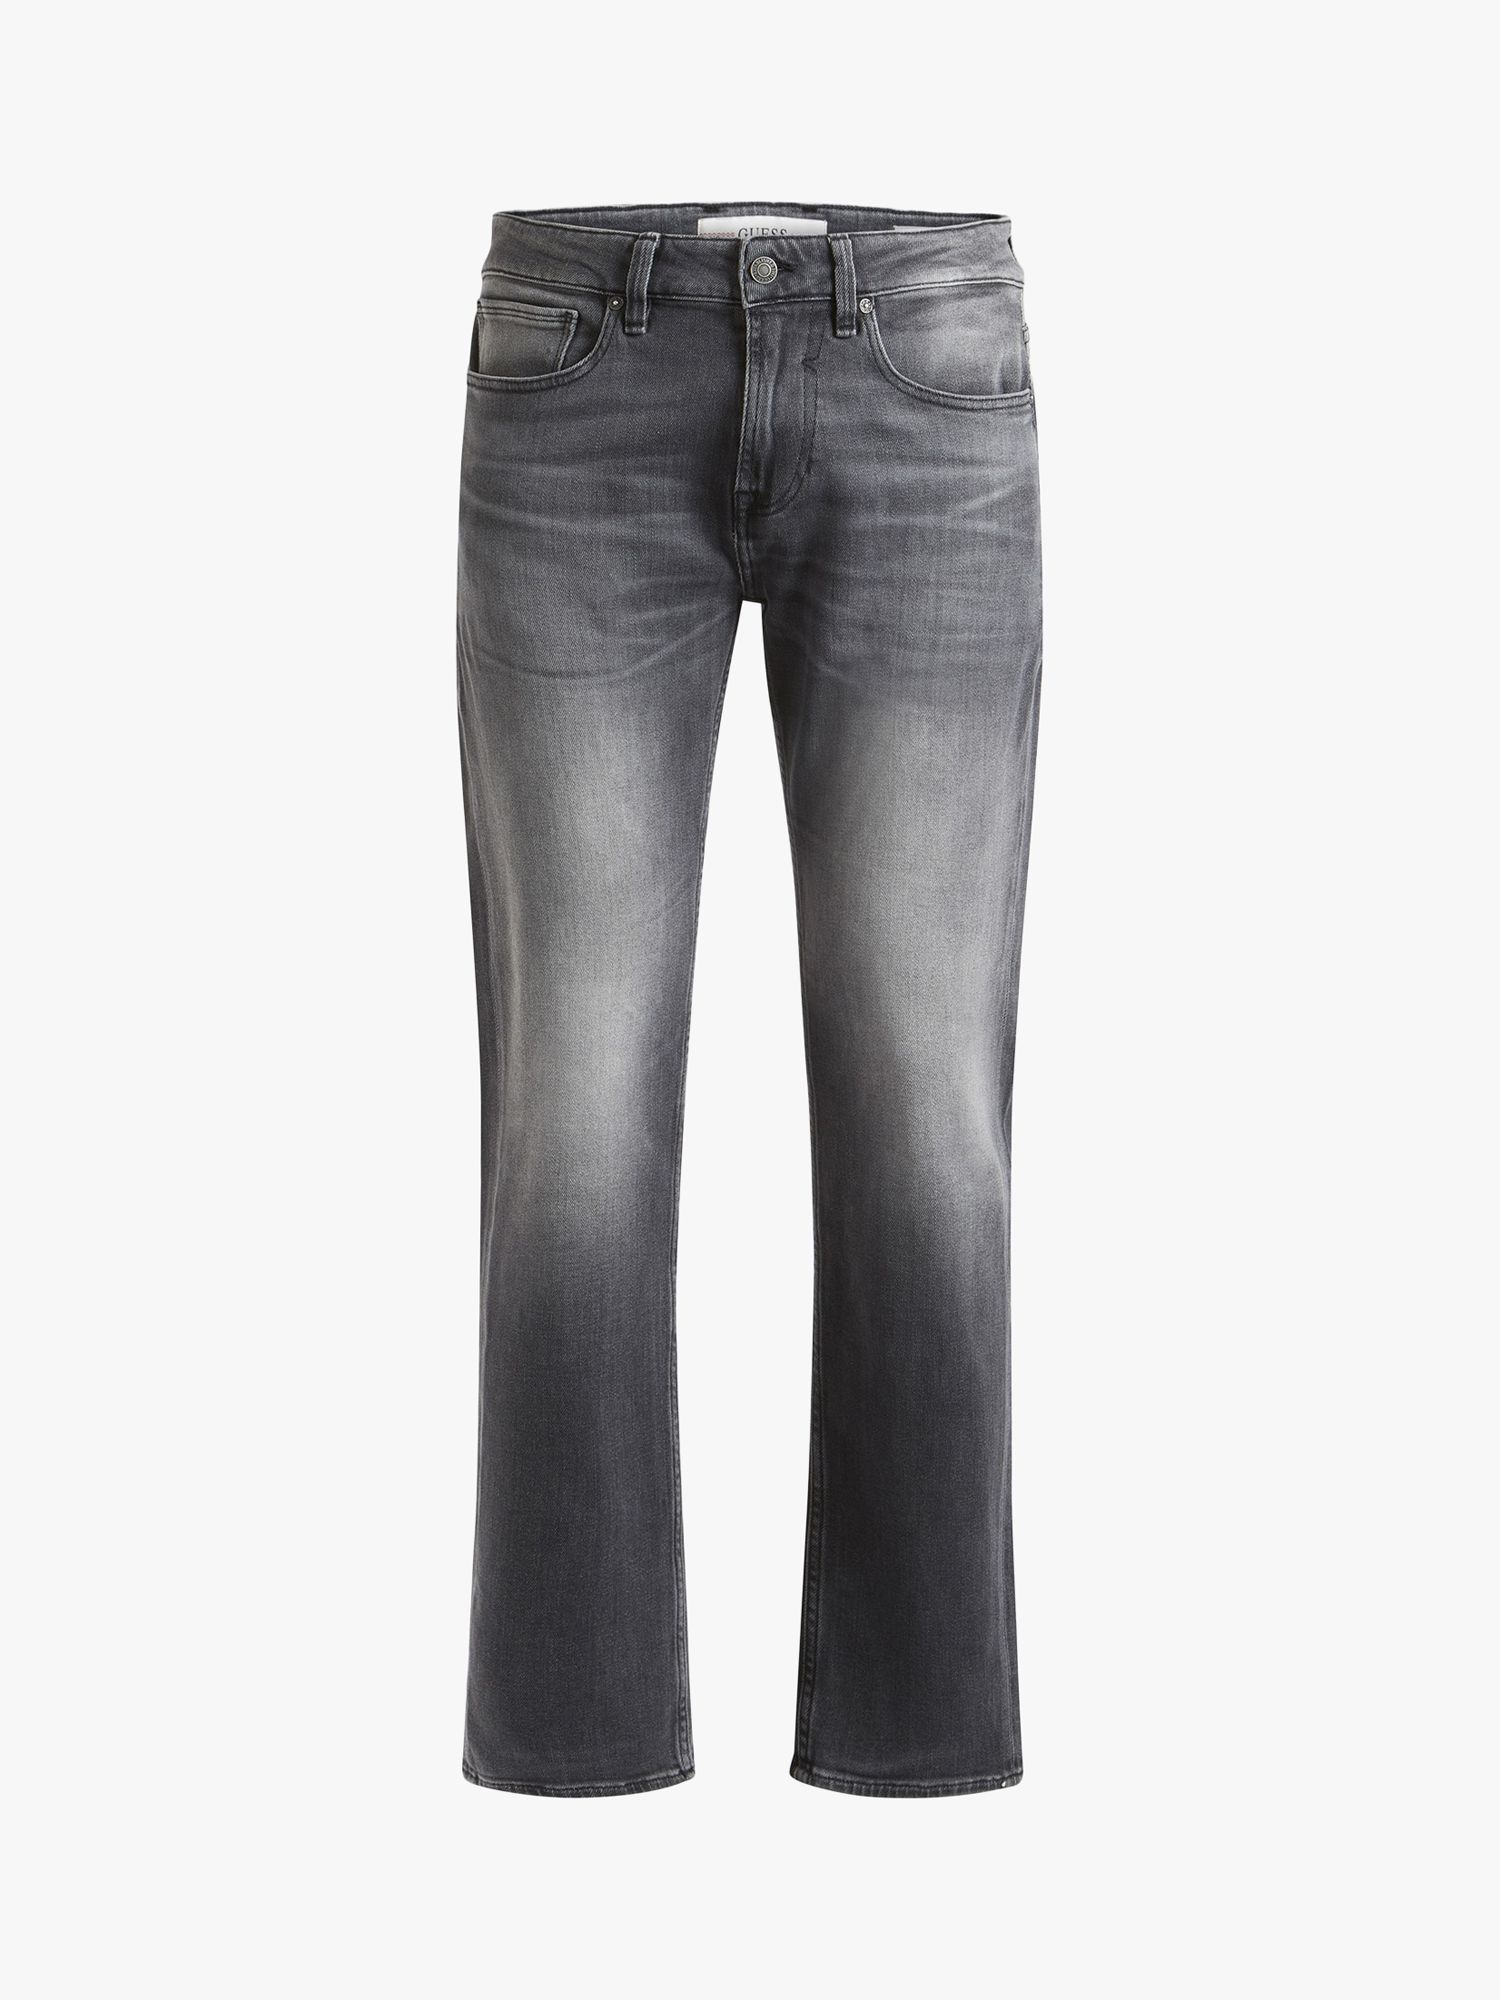 GUESS Angels Slim Fit Jeans, Carry Grey, W36/L32